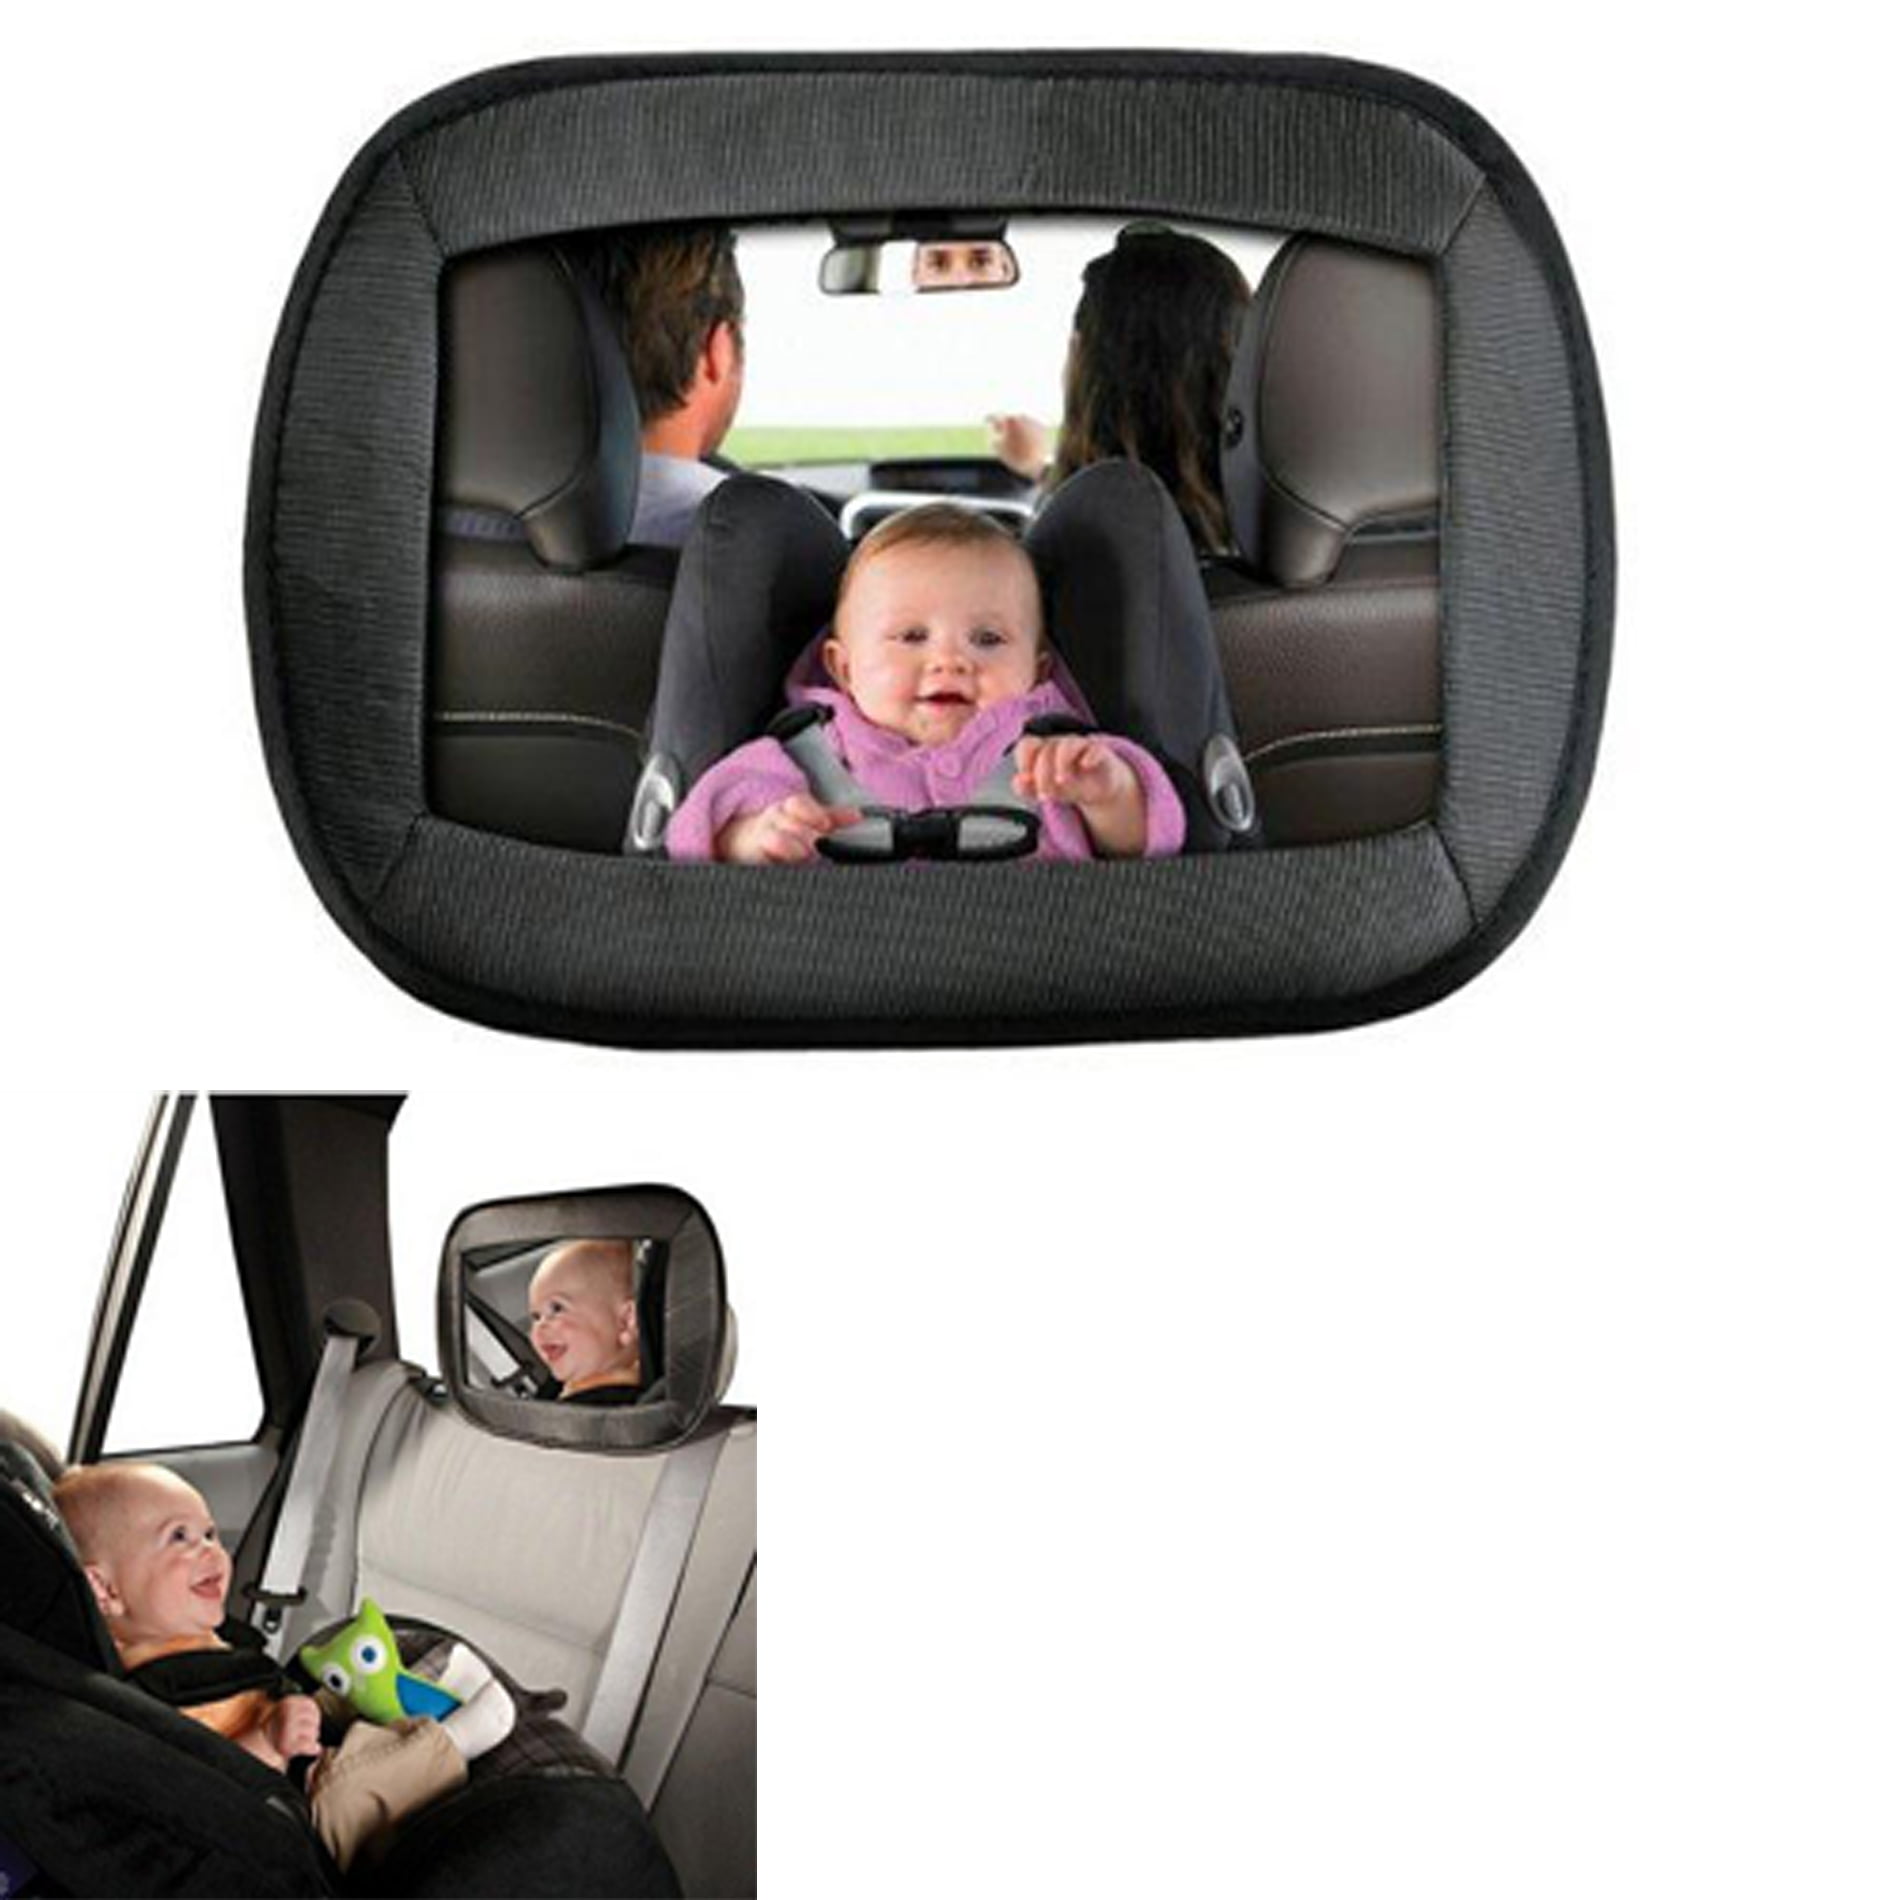 QUEES Baby Car Mirror Shatterproof Wide Clear View Baby Mirror for Back Seat Carseat Mirrors Rear Facing for Infant Safety